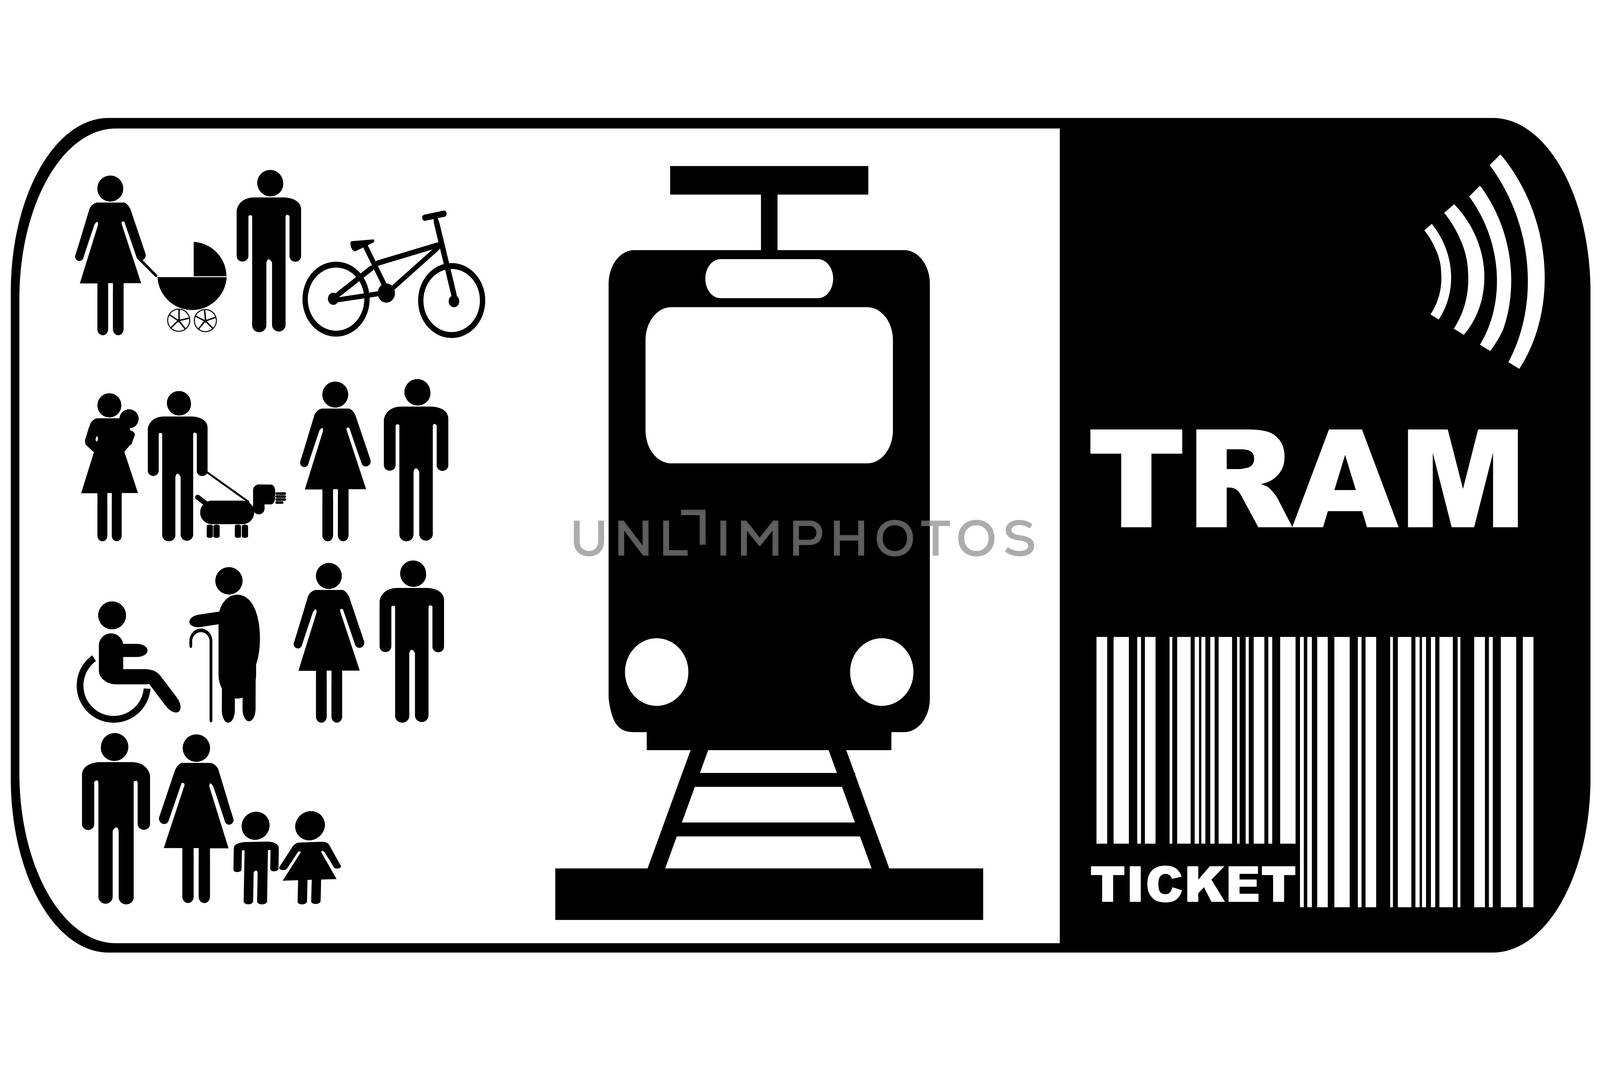 Tram ticket isolated on white background